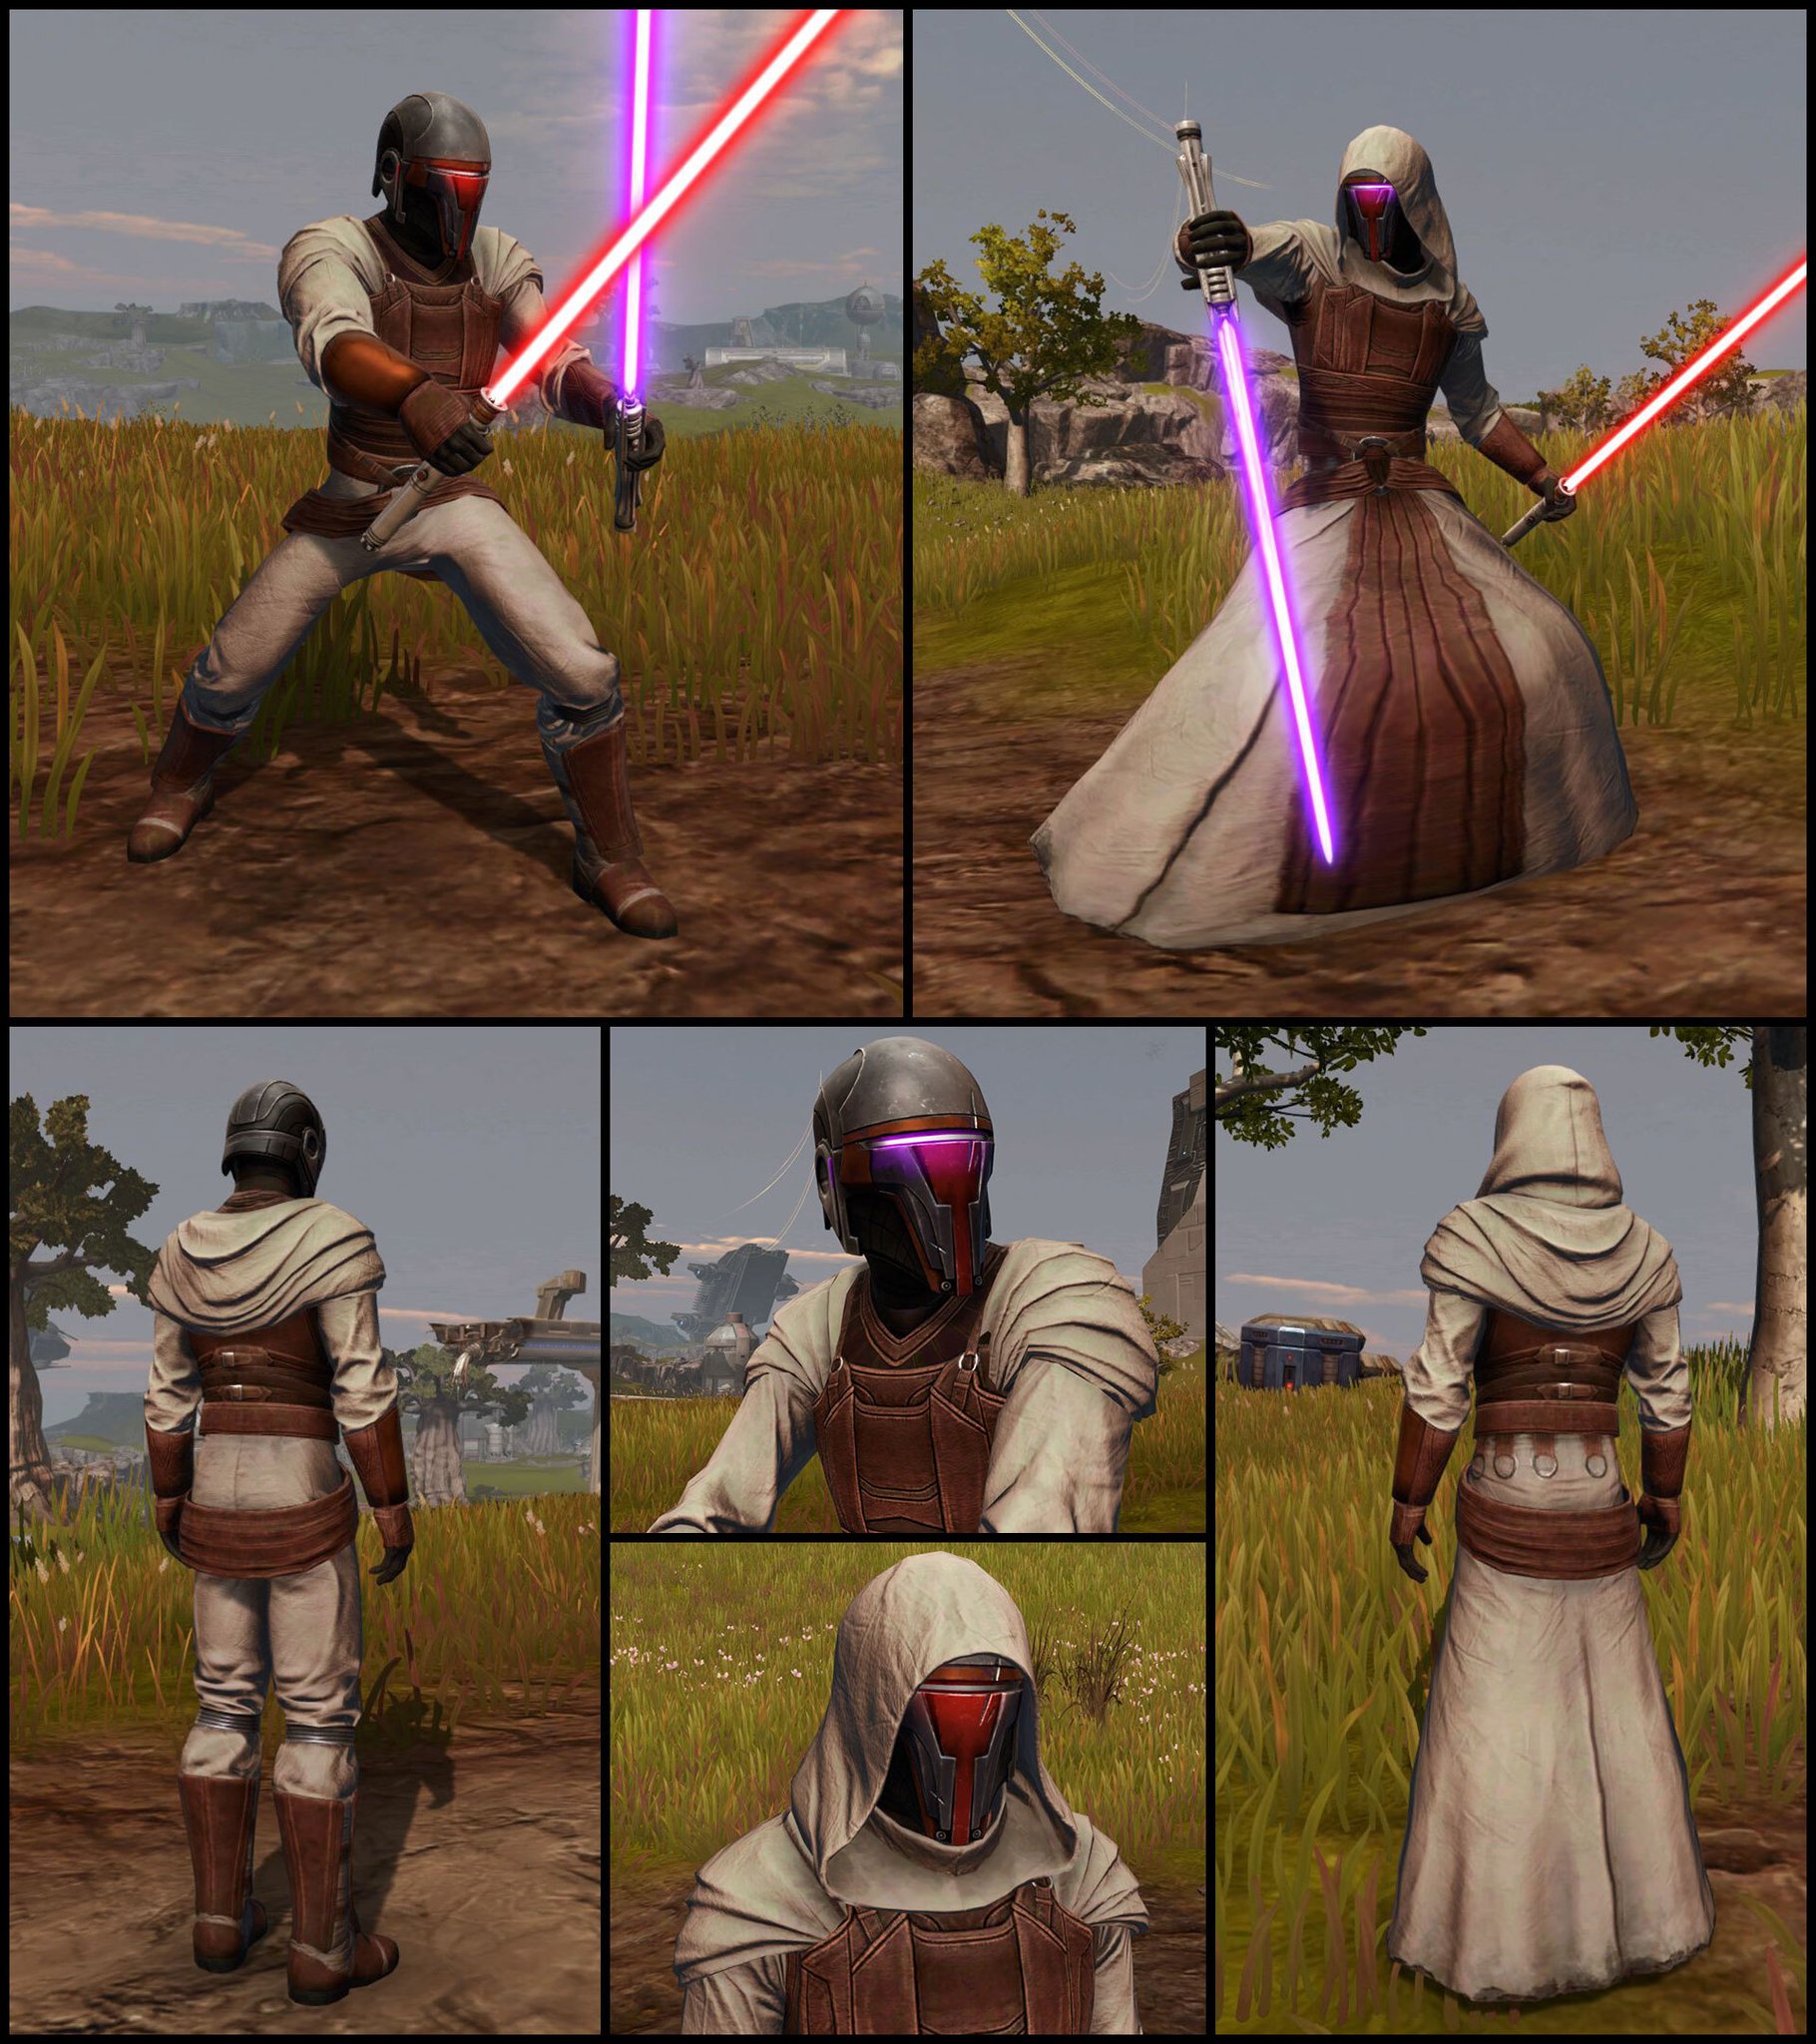 The Old Republic On Twitter Check Out One Of The Latest Additions To The Cartel Market The Jedi Knight Revan S Armor Set This Set Comes With Two Different Chest And Leg Pieces